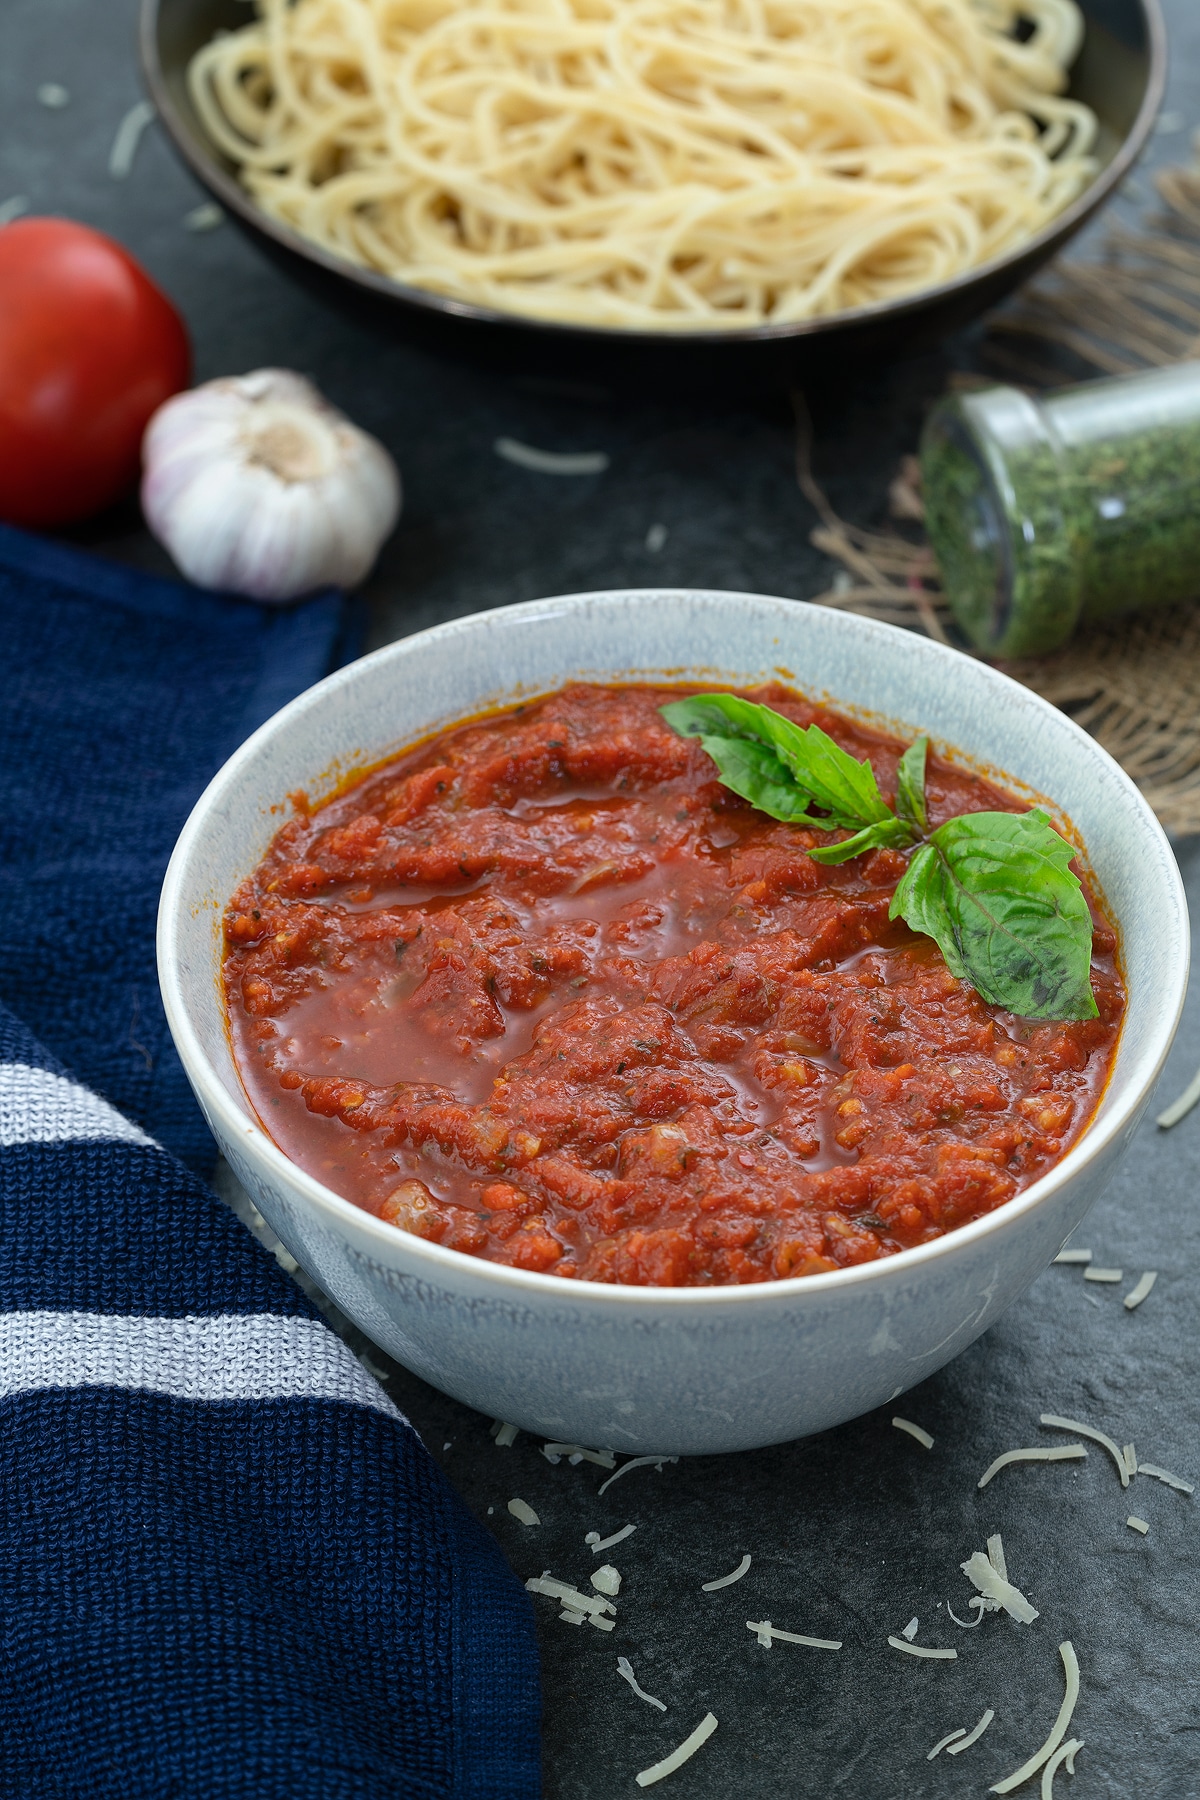 Homemade Pasta Sauce In a bowl